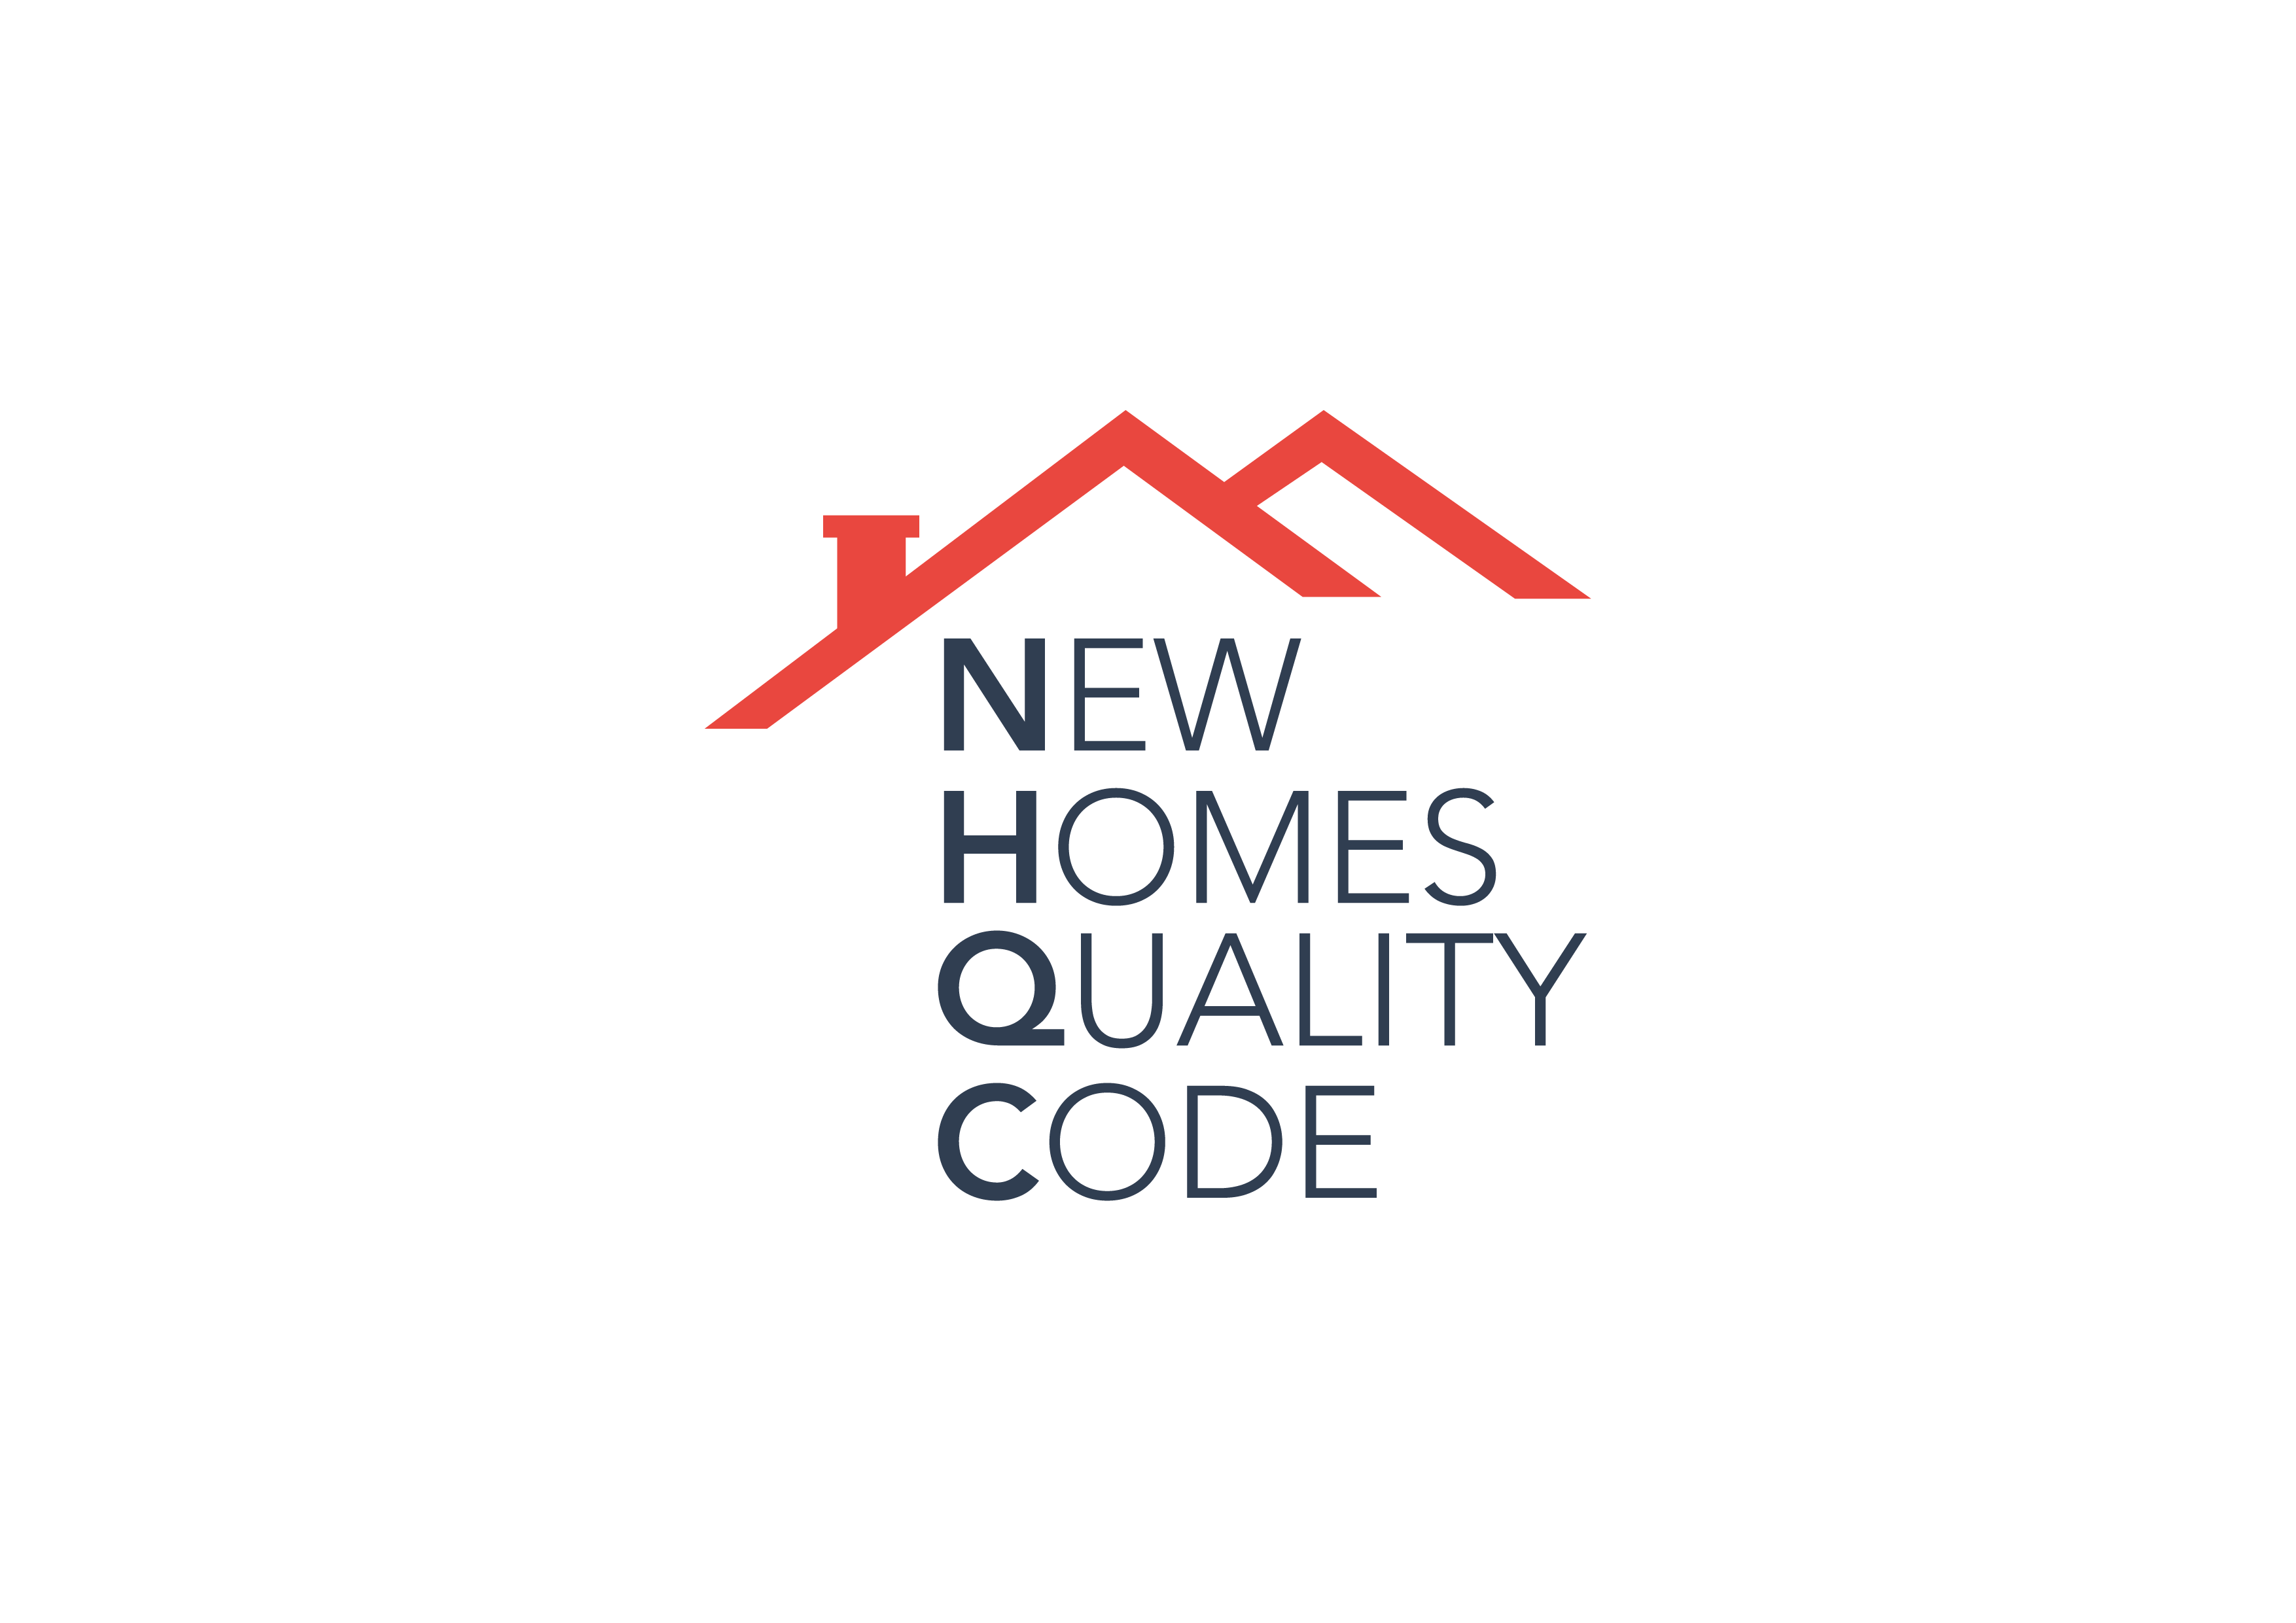 Guided Home is Proud to be an New Homes Quality Code Accredited Supplier